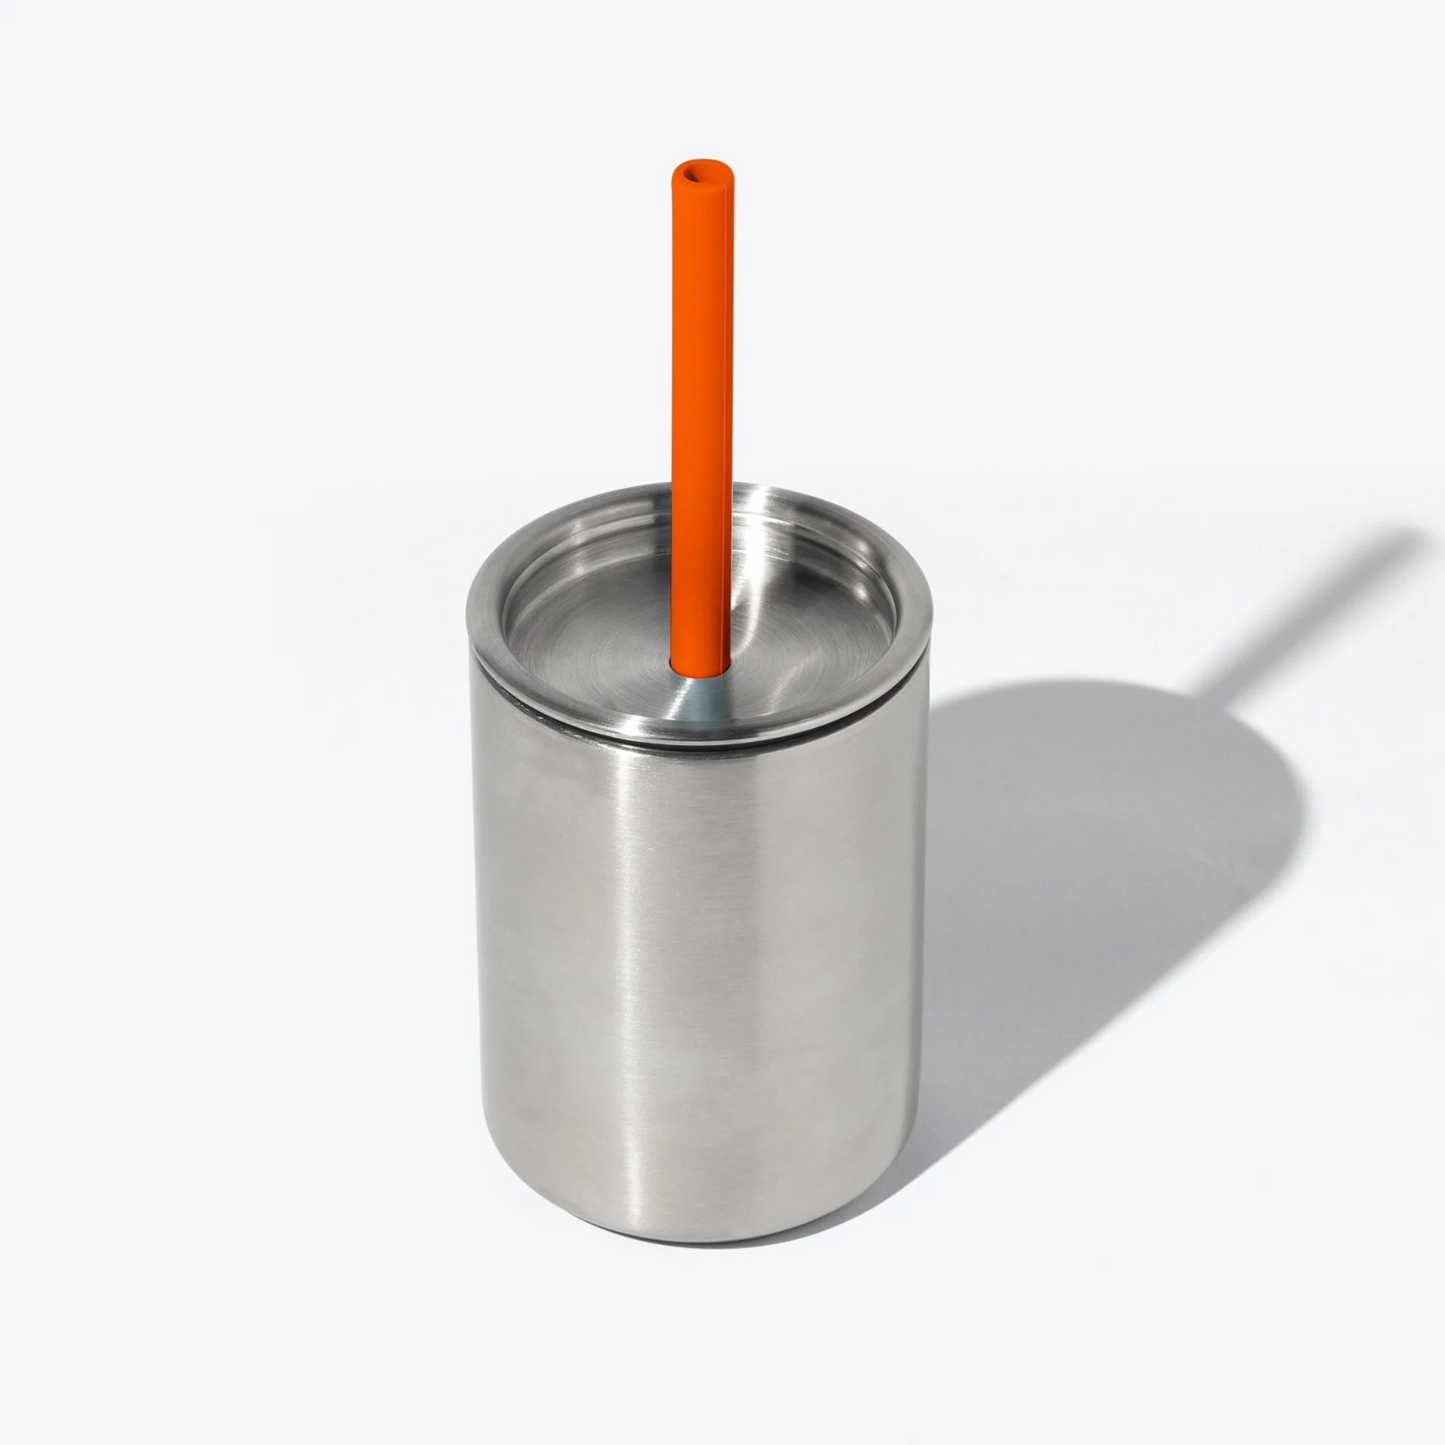 stainless steel baby cup in orange